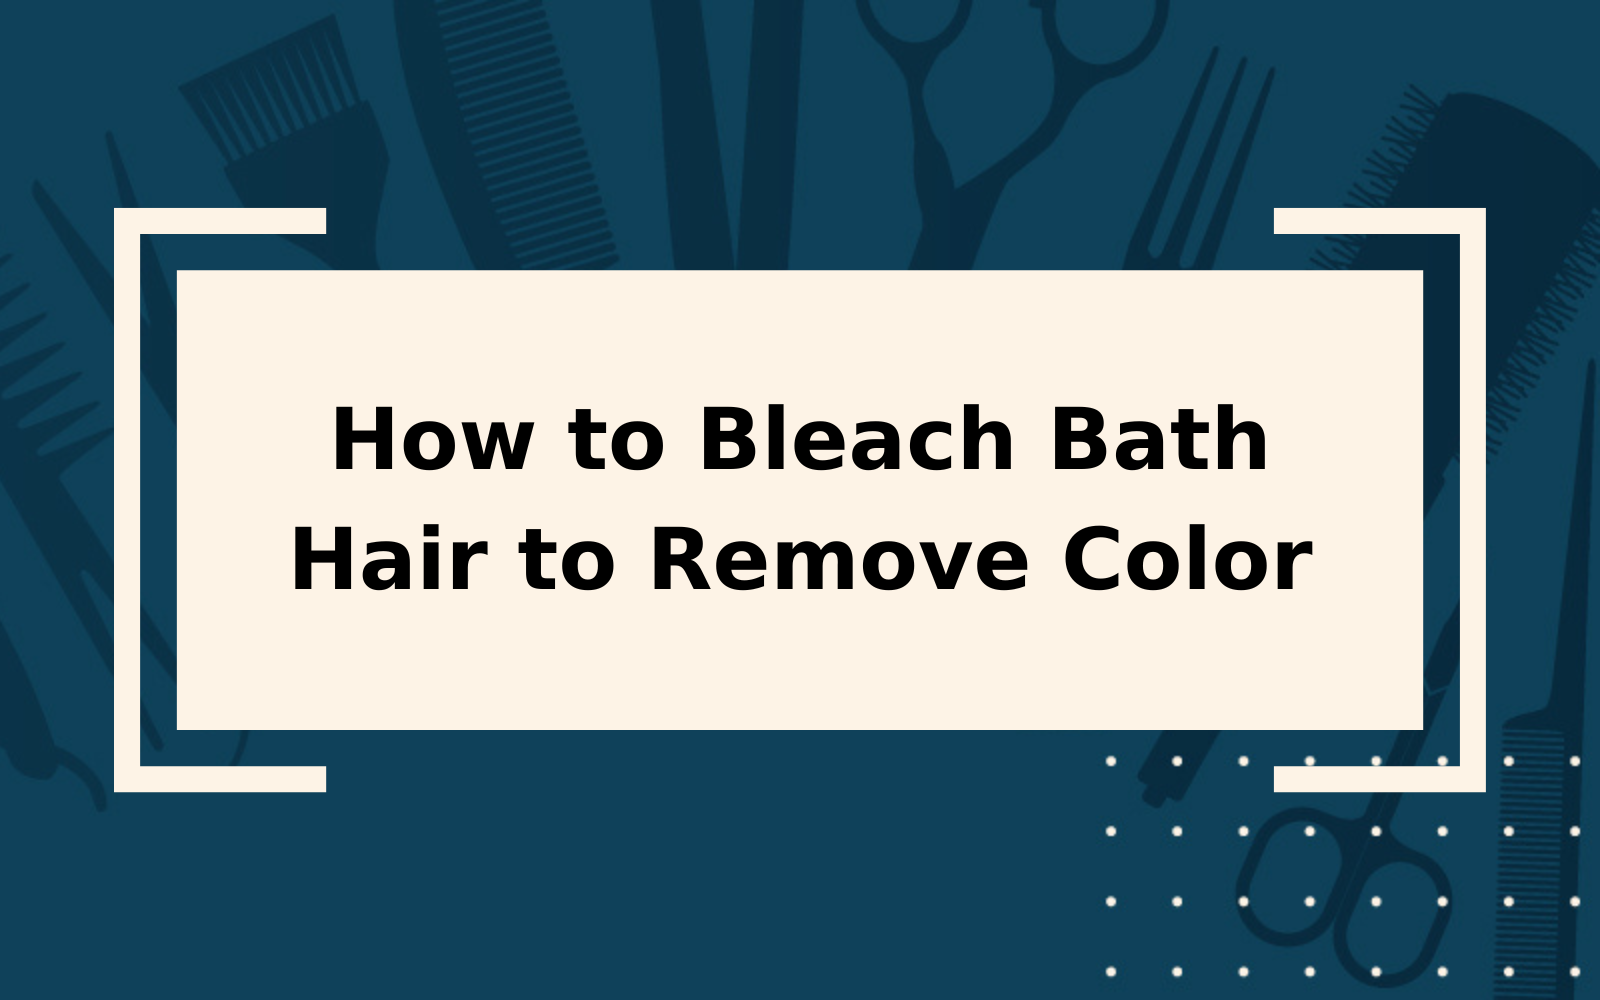 How to Bleach Bath Hair to Remove Color | Step-by-Step